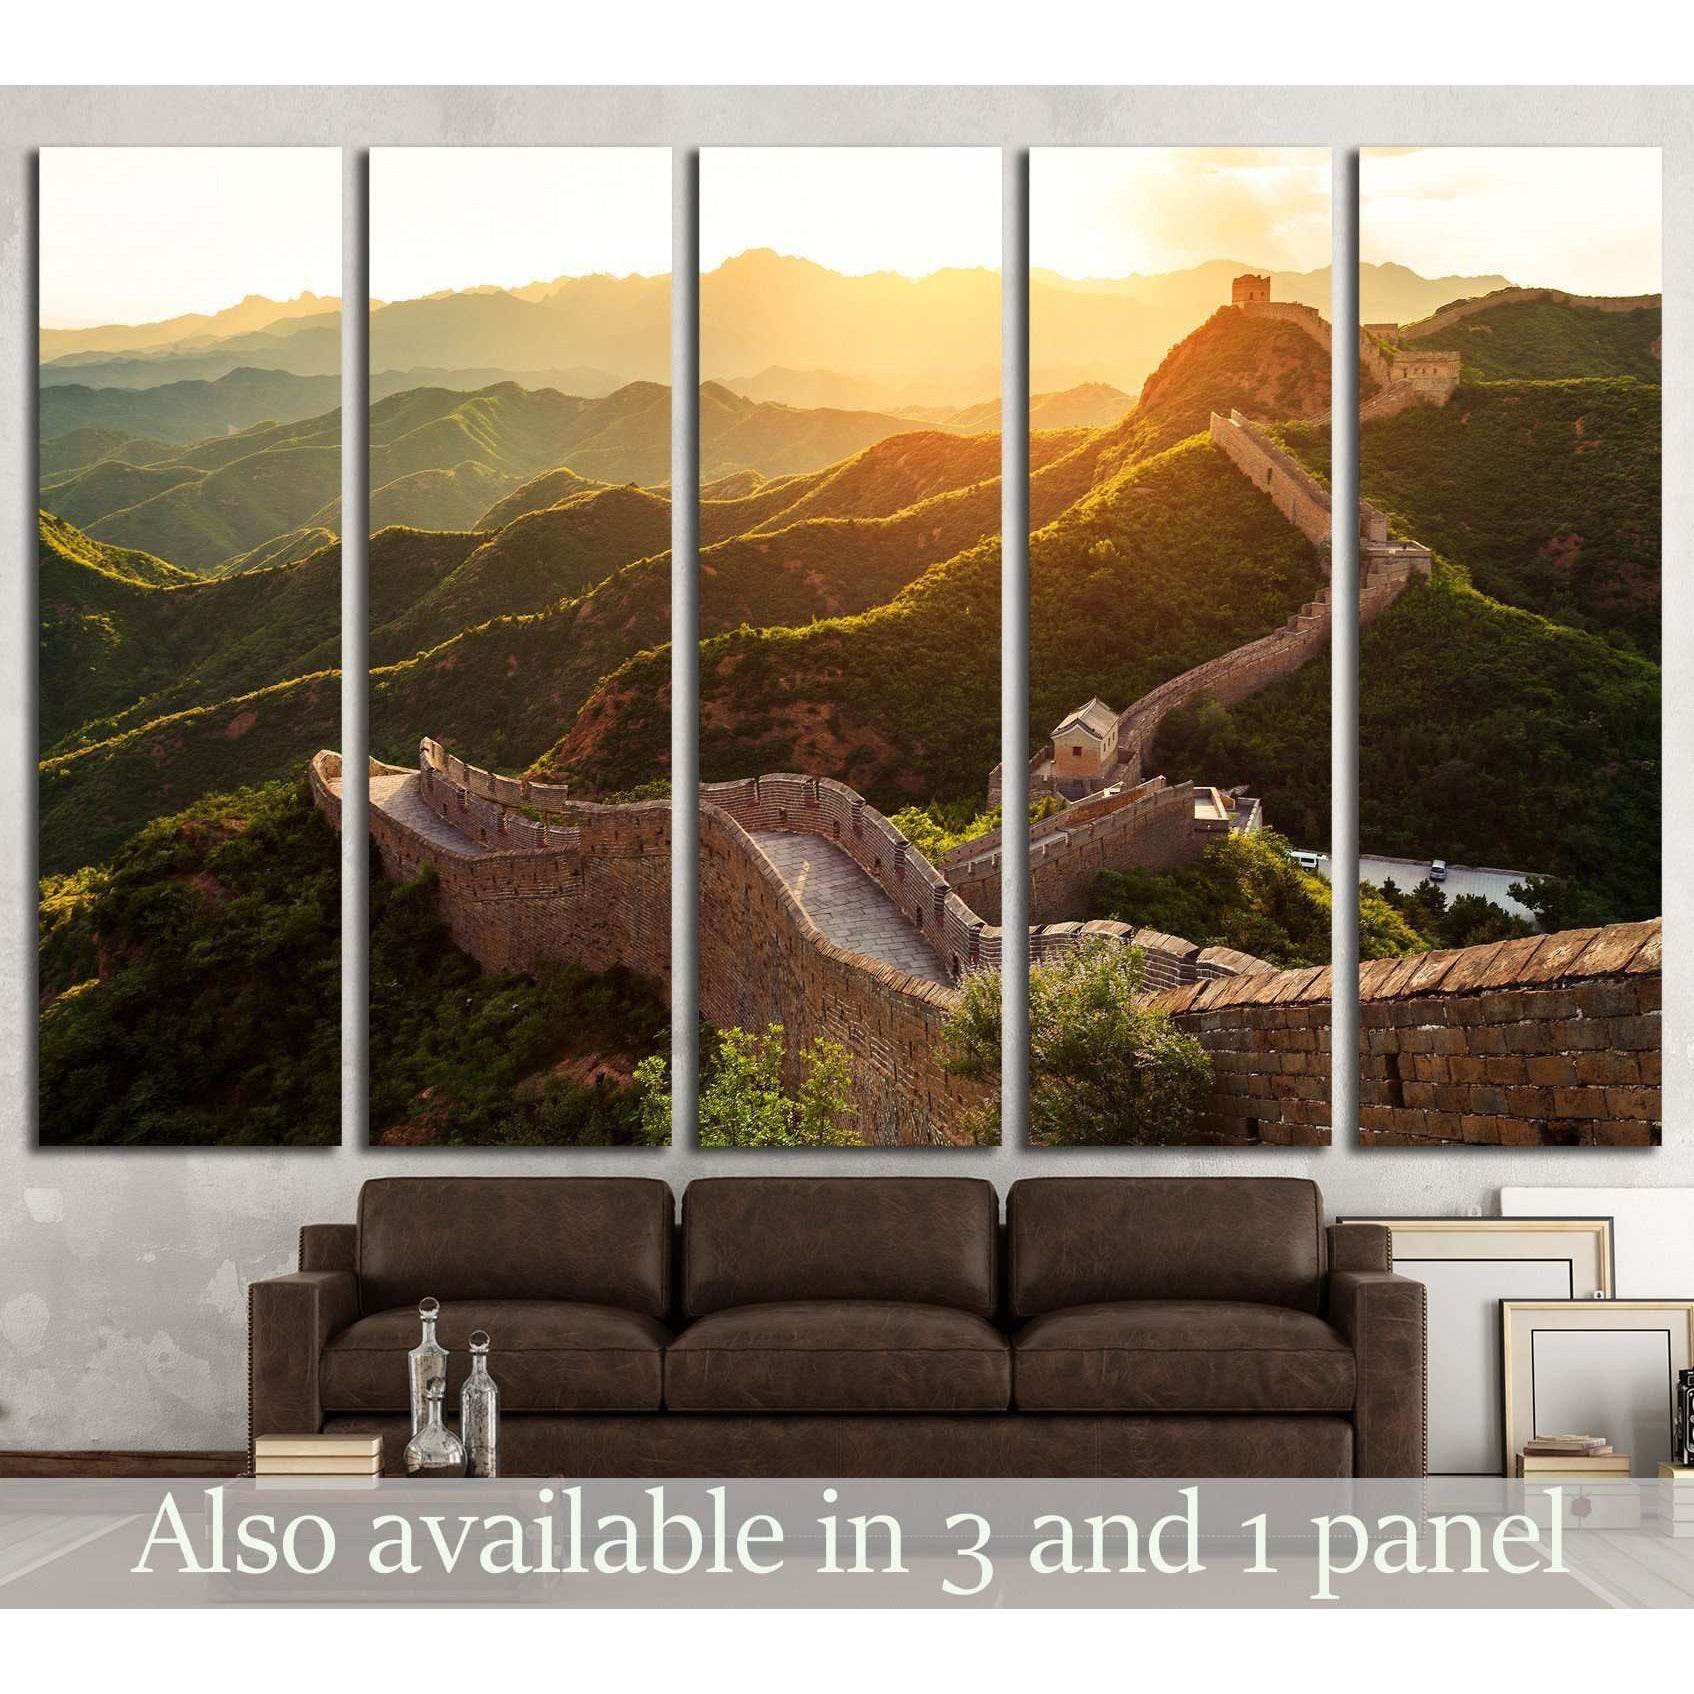 Great wall under sunshine during sunset №1901 Ready to Hang Canvas Print